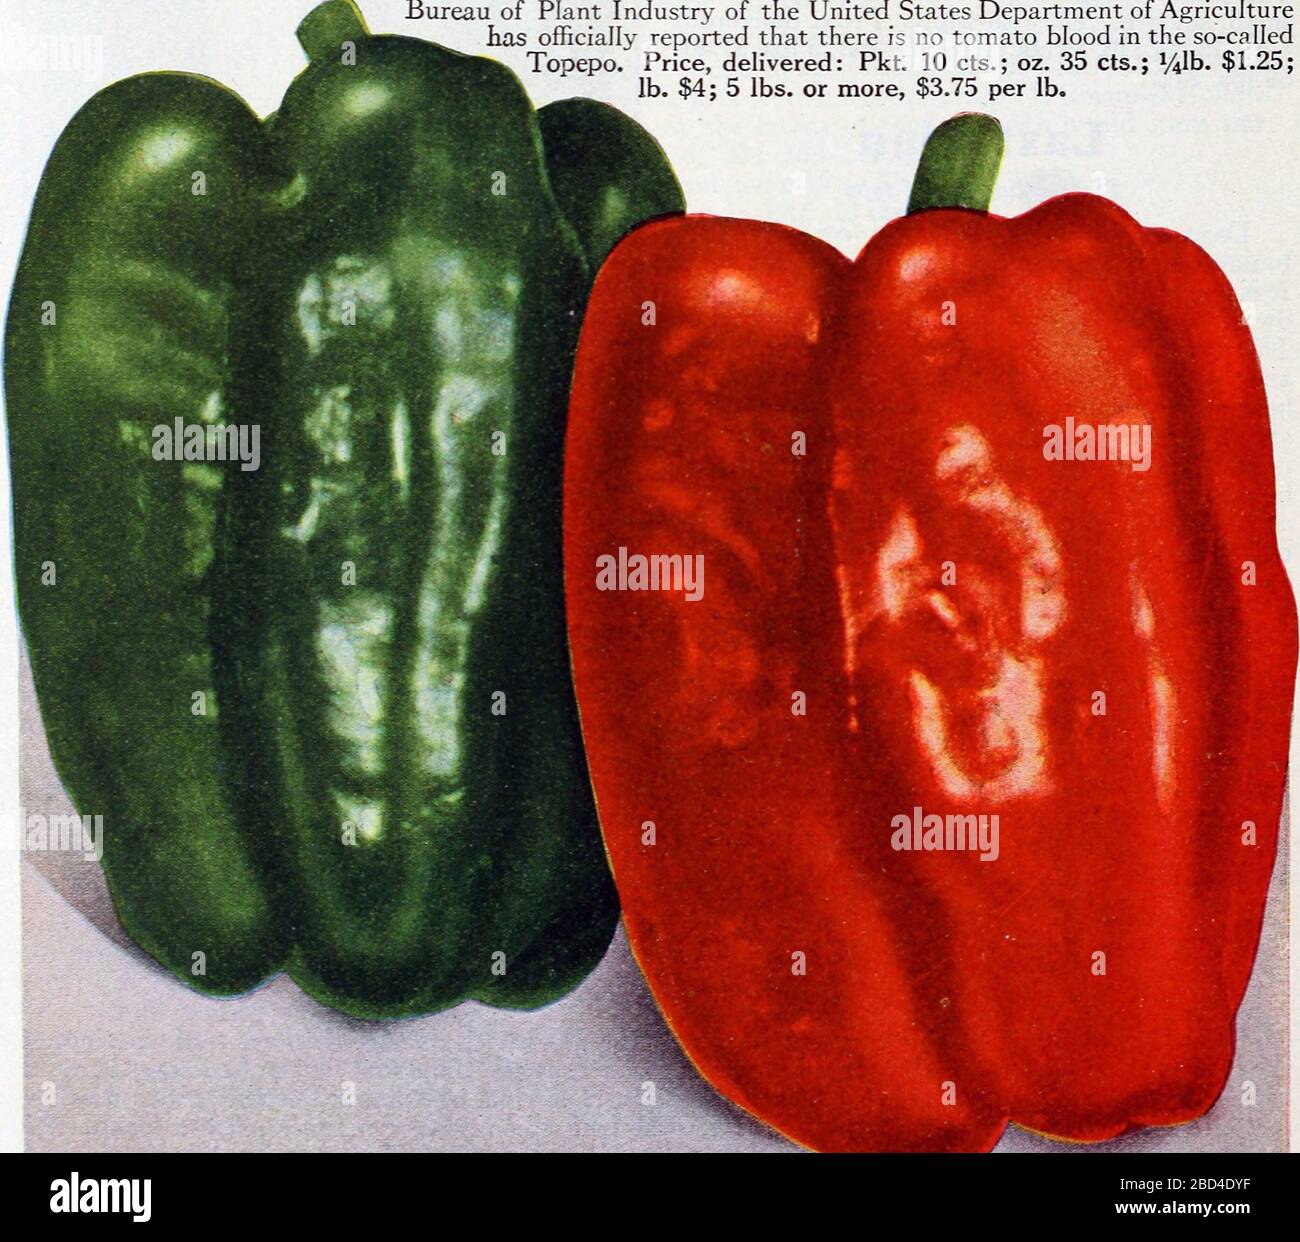 Historical Food Illustration - Green Bell Pepper and Red Bell Pepper - Image from page 35 of 'Eighty-five super-standard strains season of 1927' (1927) Stock Photo